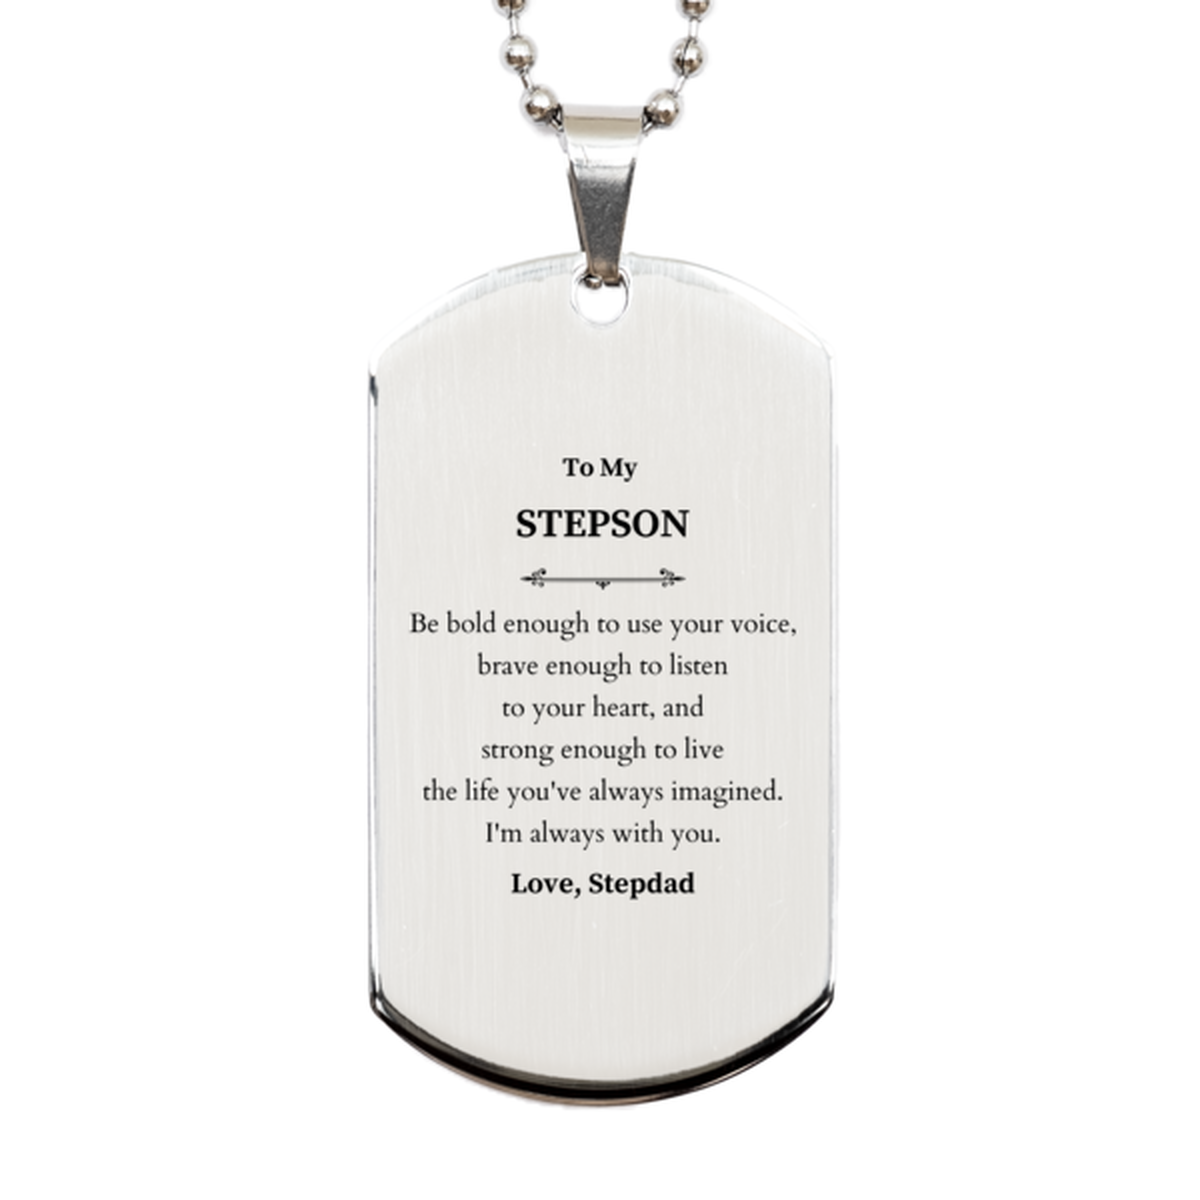 Keepsake Stepson Silver Dog Tag Gift Idea Graduation Christmas Birthday Stepson from Stepdad, Stepson Be bold enough to use your voice, brave enough to listen to your heart. Love, Stepdad